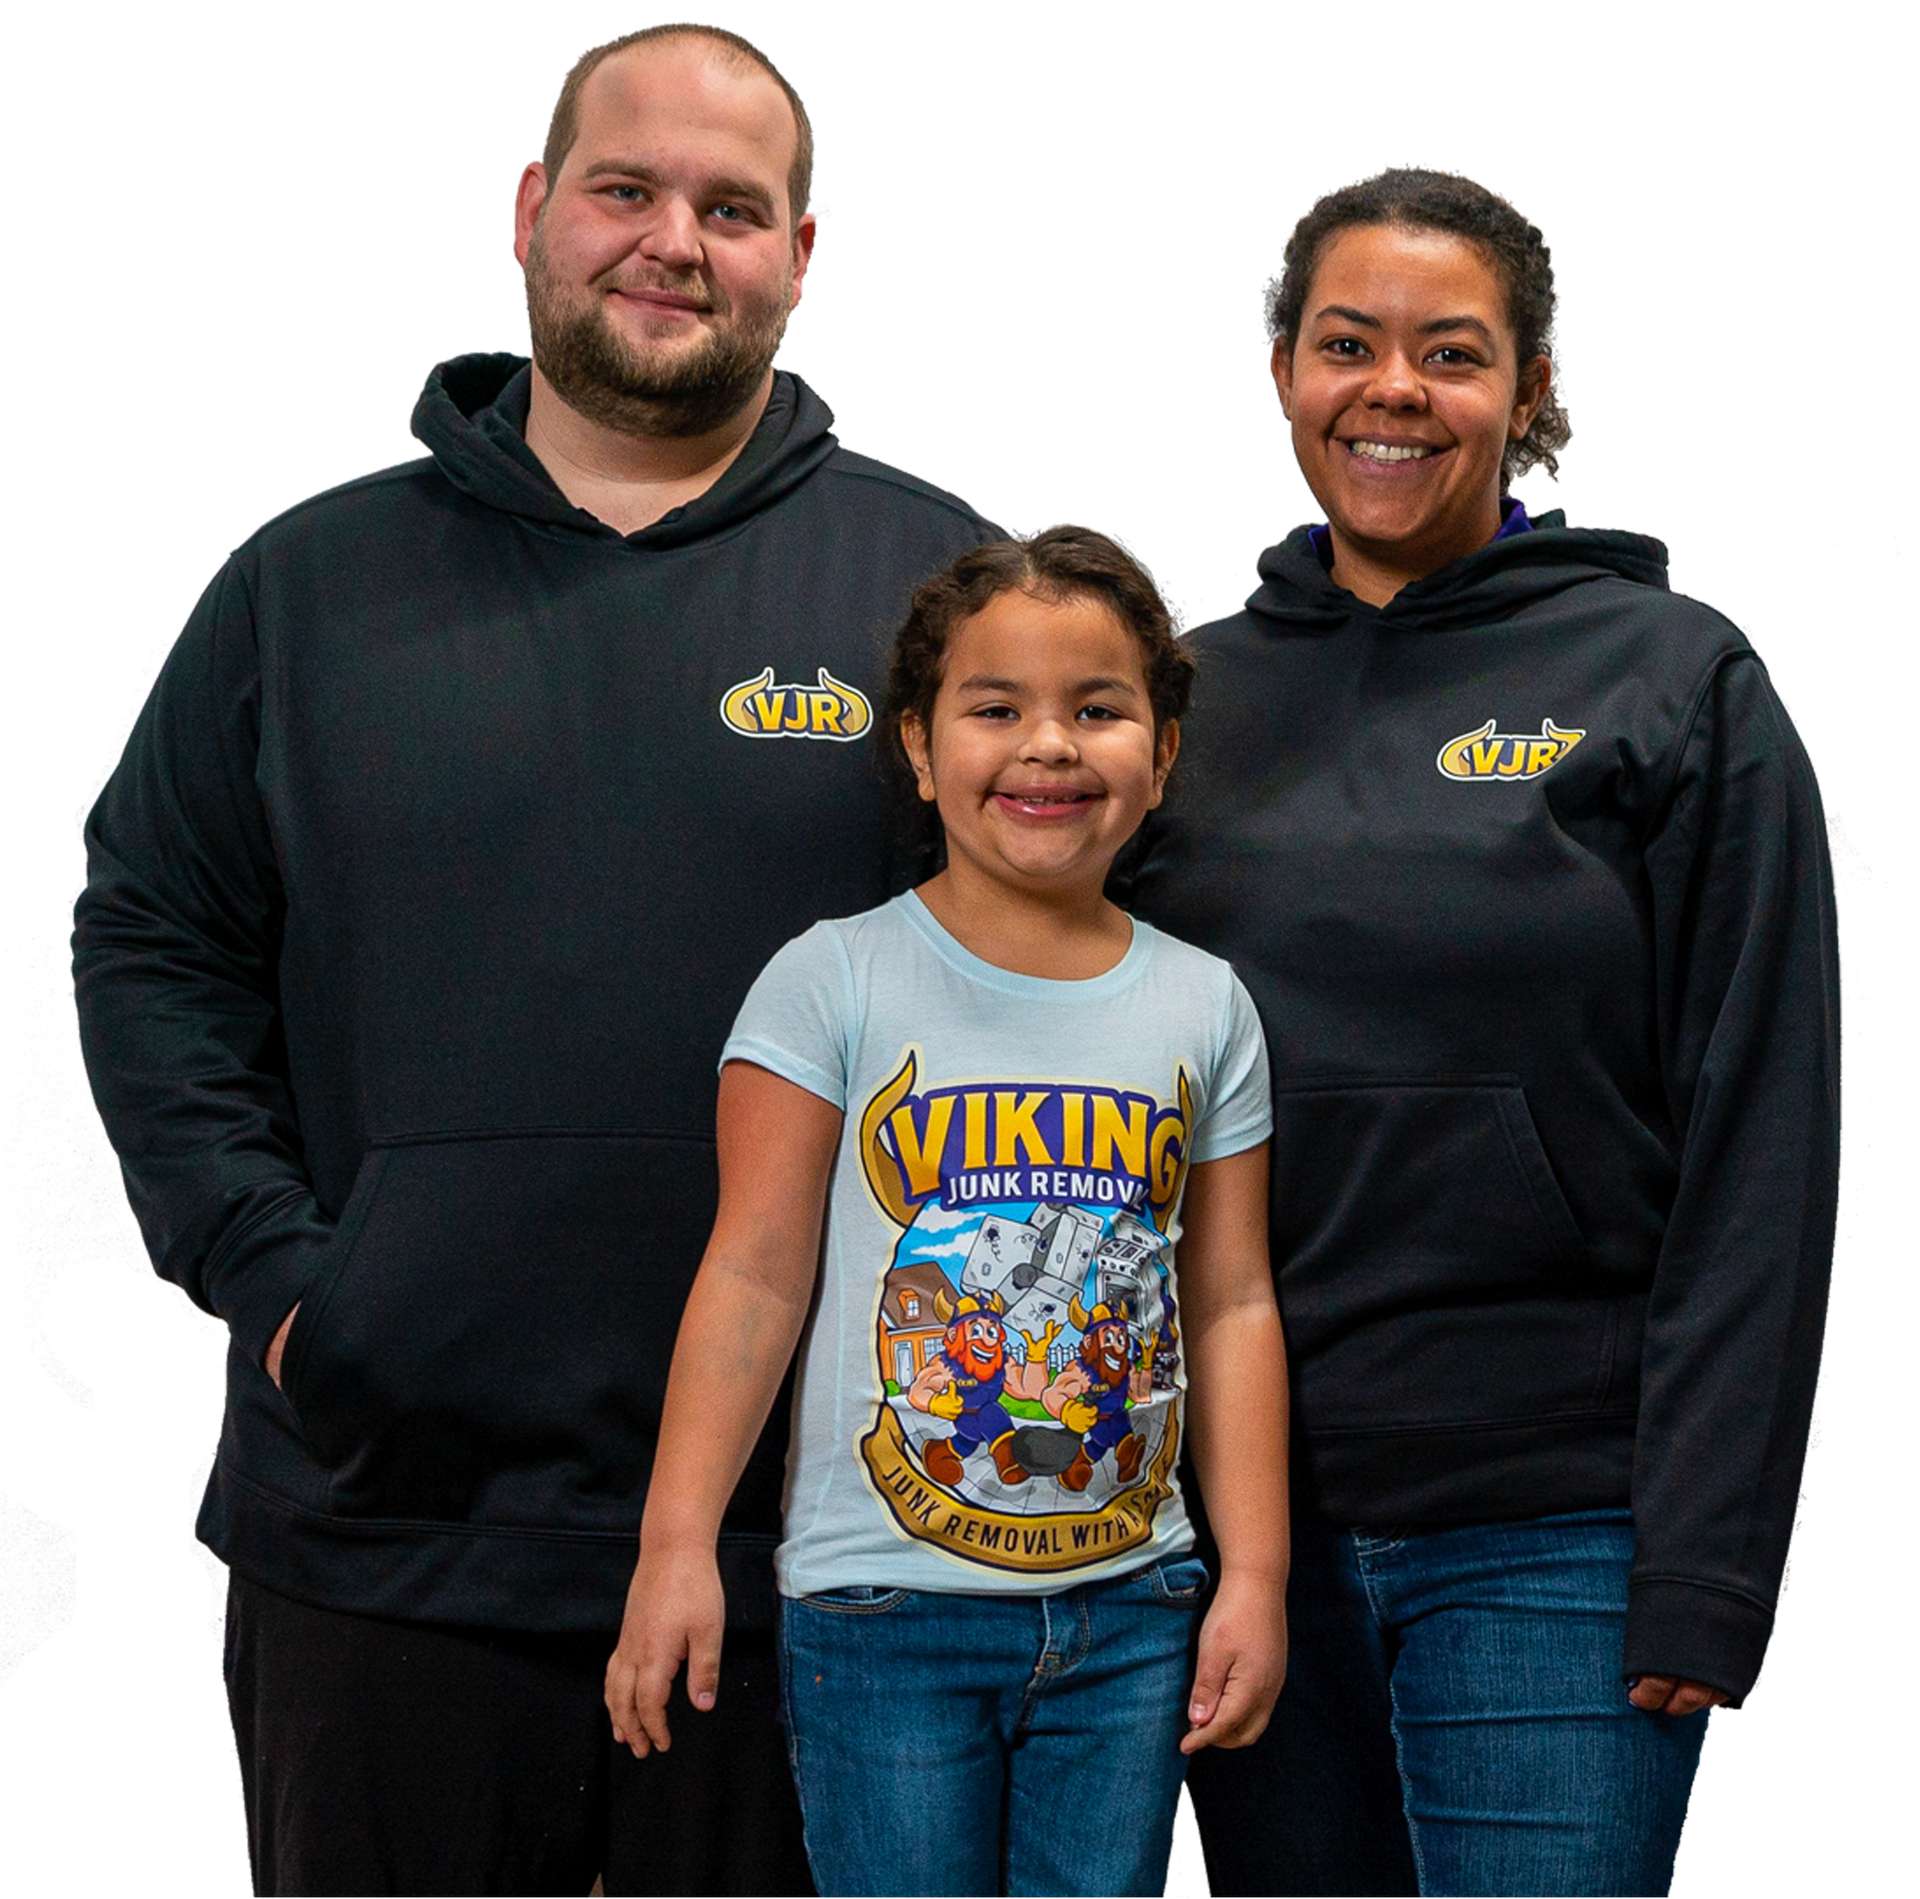 a family picture of owner the viking junk removal business